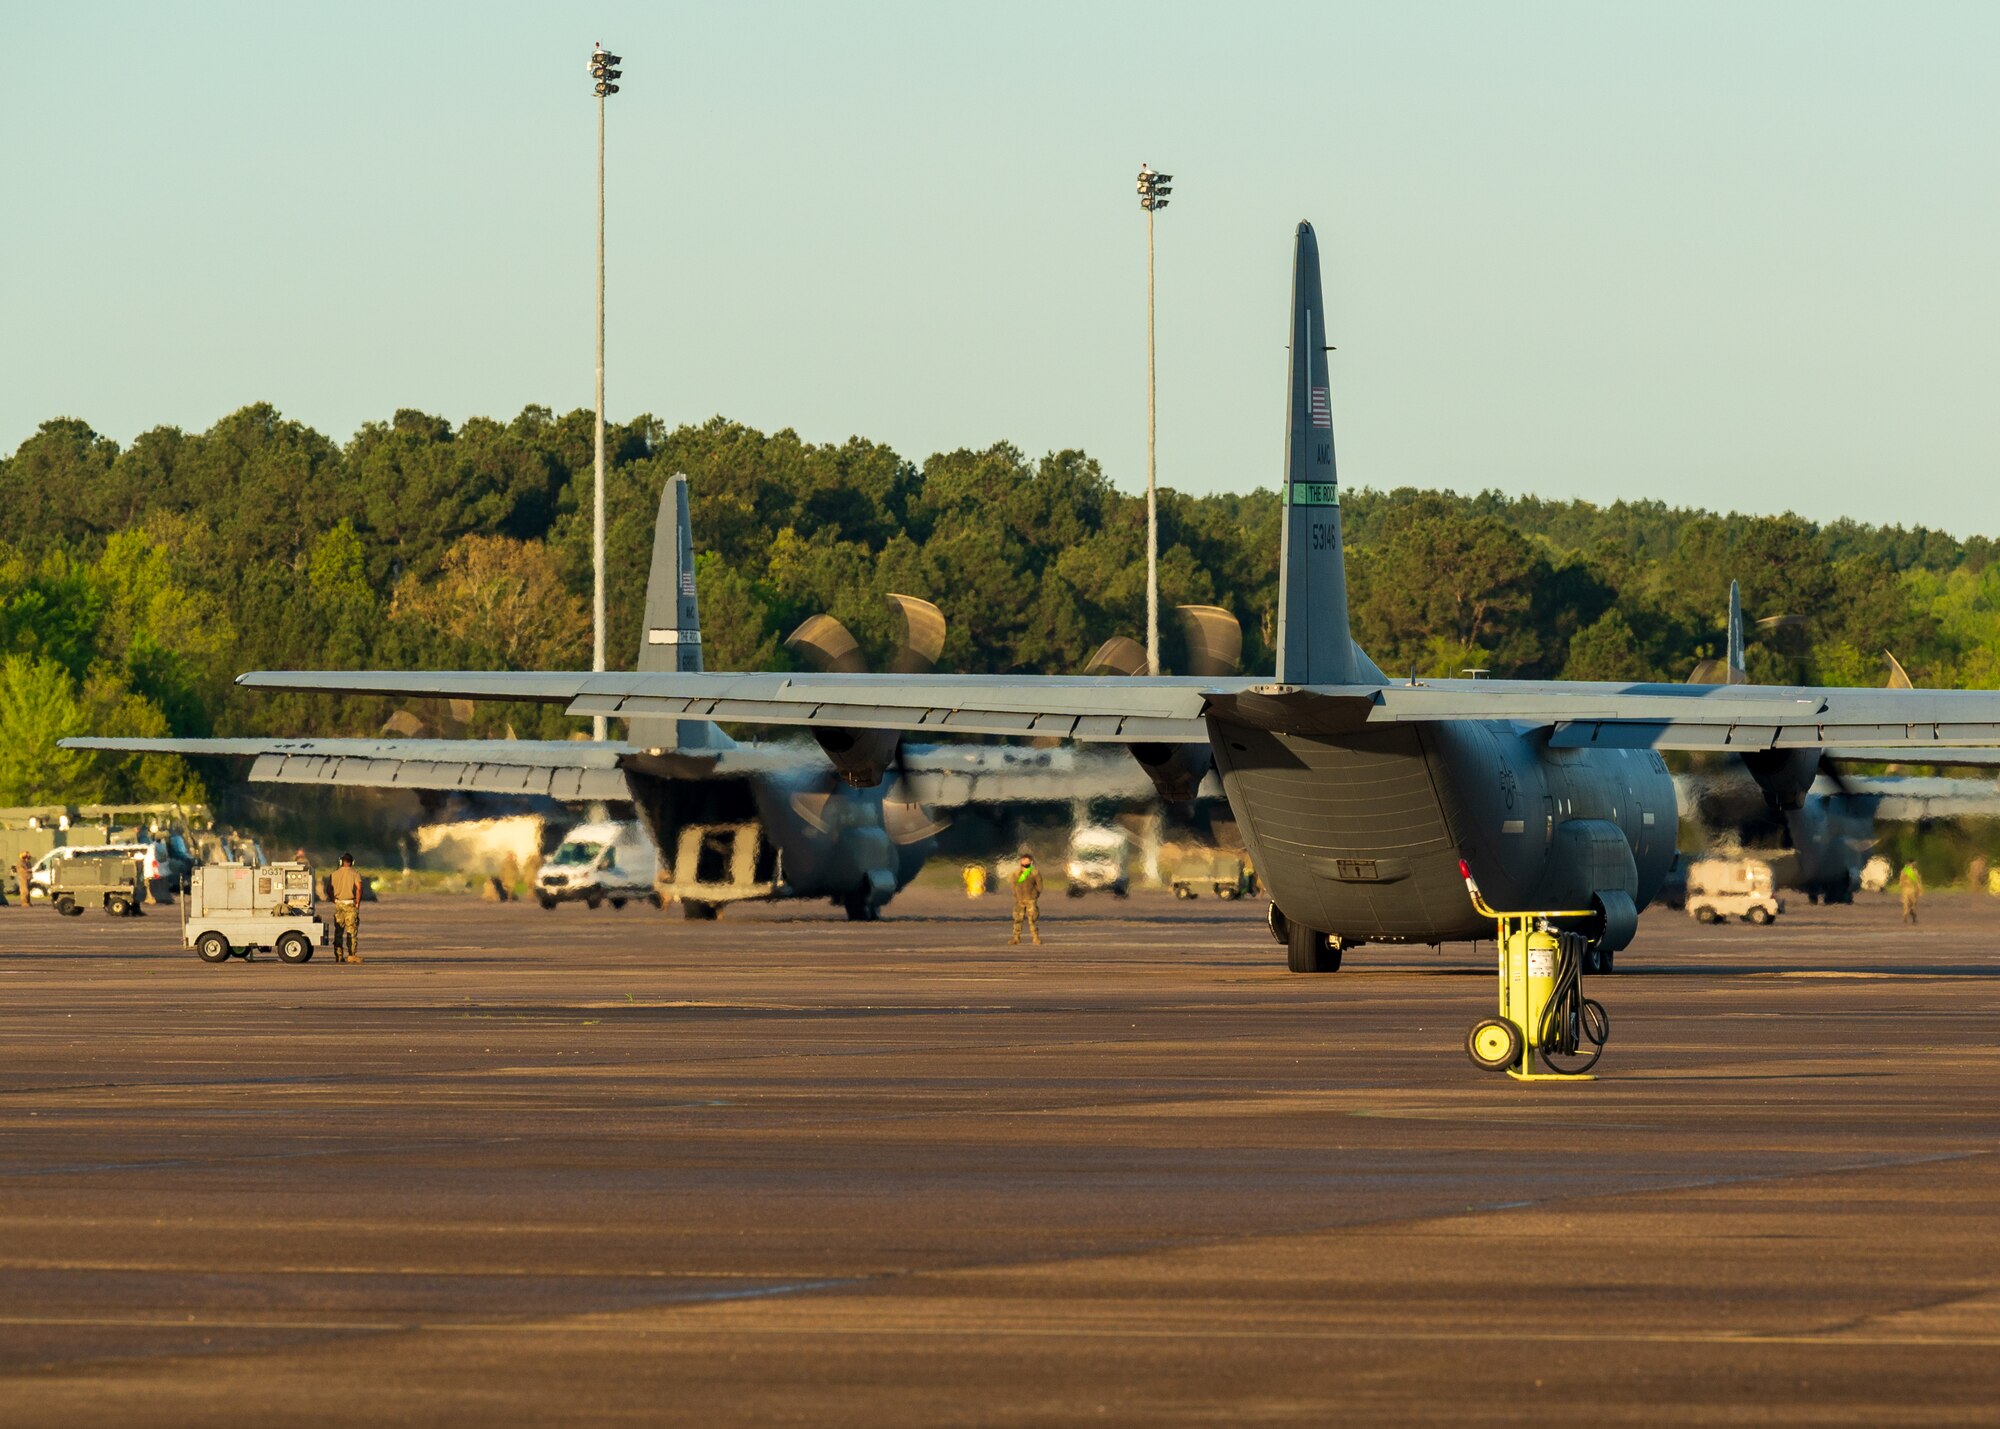 U.S. Air Force C-130J Super Hercules conduct an engine check on the flighline prior to joining an 11-ship formation from Little Rock Air Force Base, Ark., April 15. 2021. The elephant walk quickly launched combat airlift to support an U.S. Army Joint Readiness Training event. (U.S. Air Force photo by Maj. Ashley Walker)